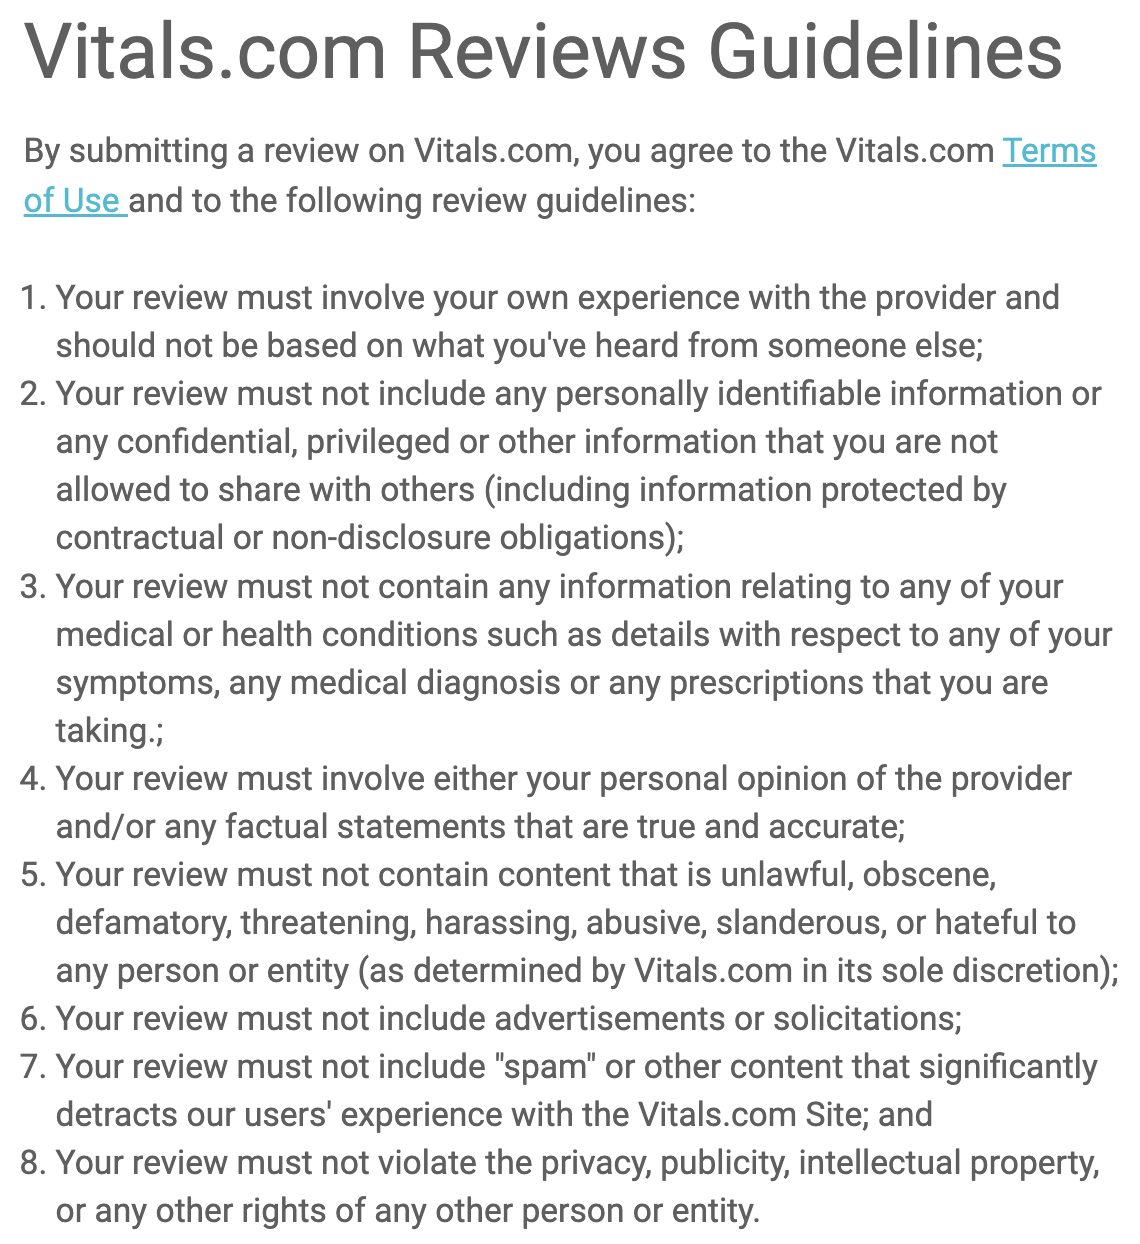 vitals.com review guidelines